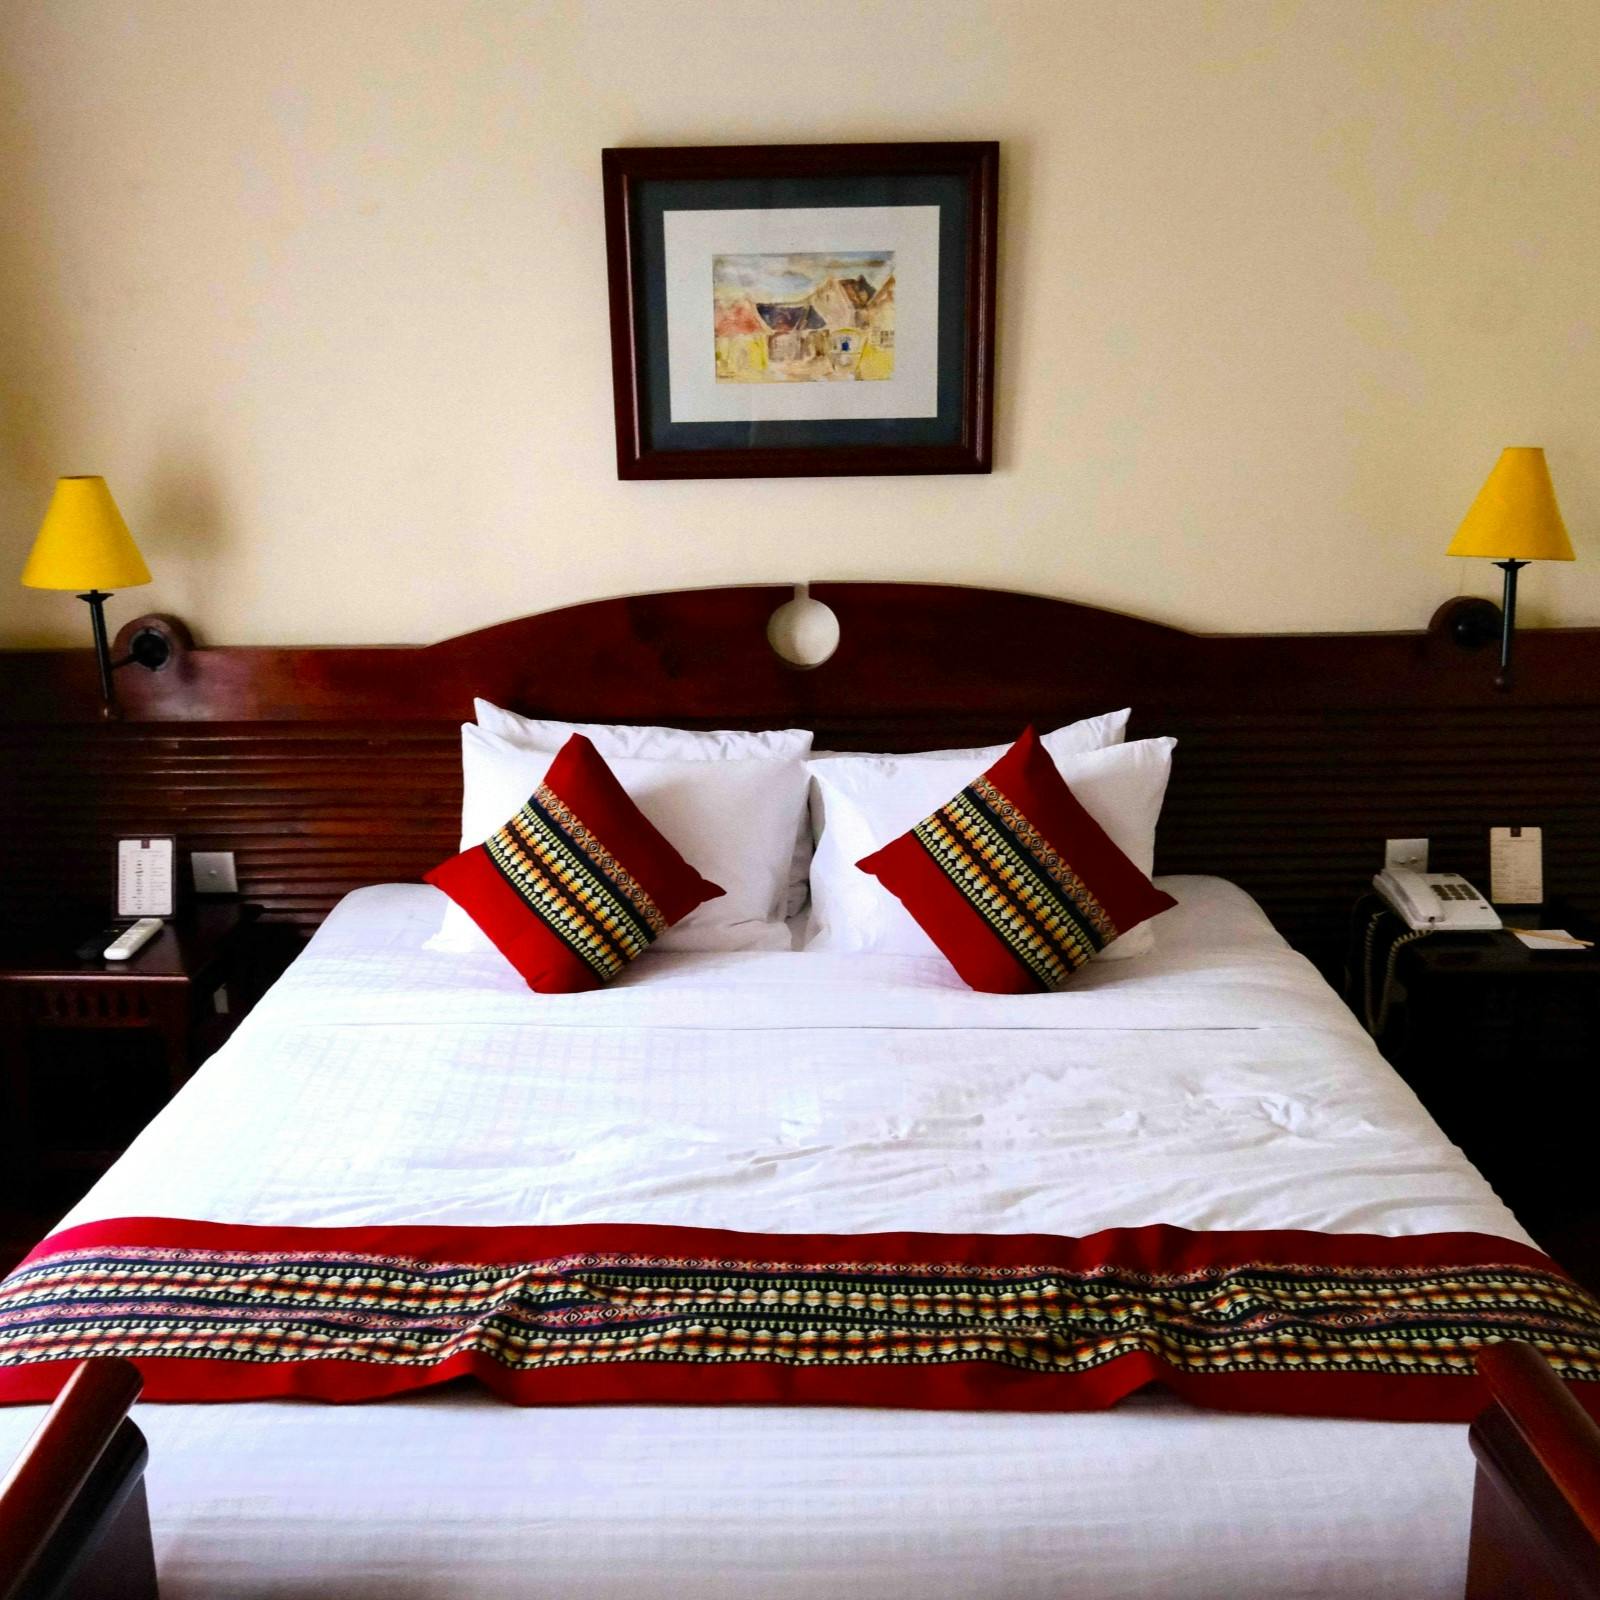 Victoria Chau Doc Hotel, Mekong Delta, Independent Review